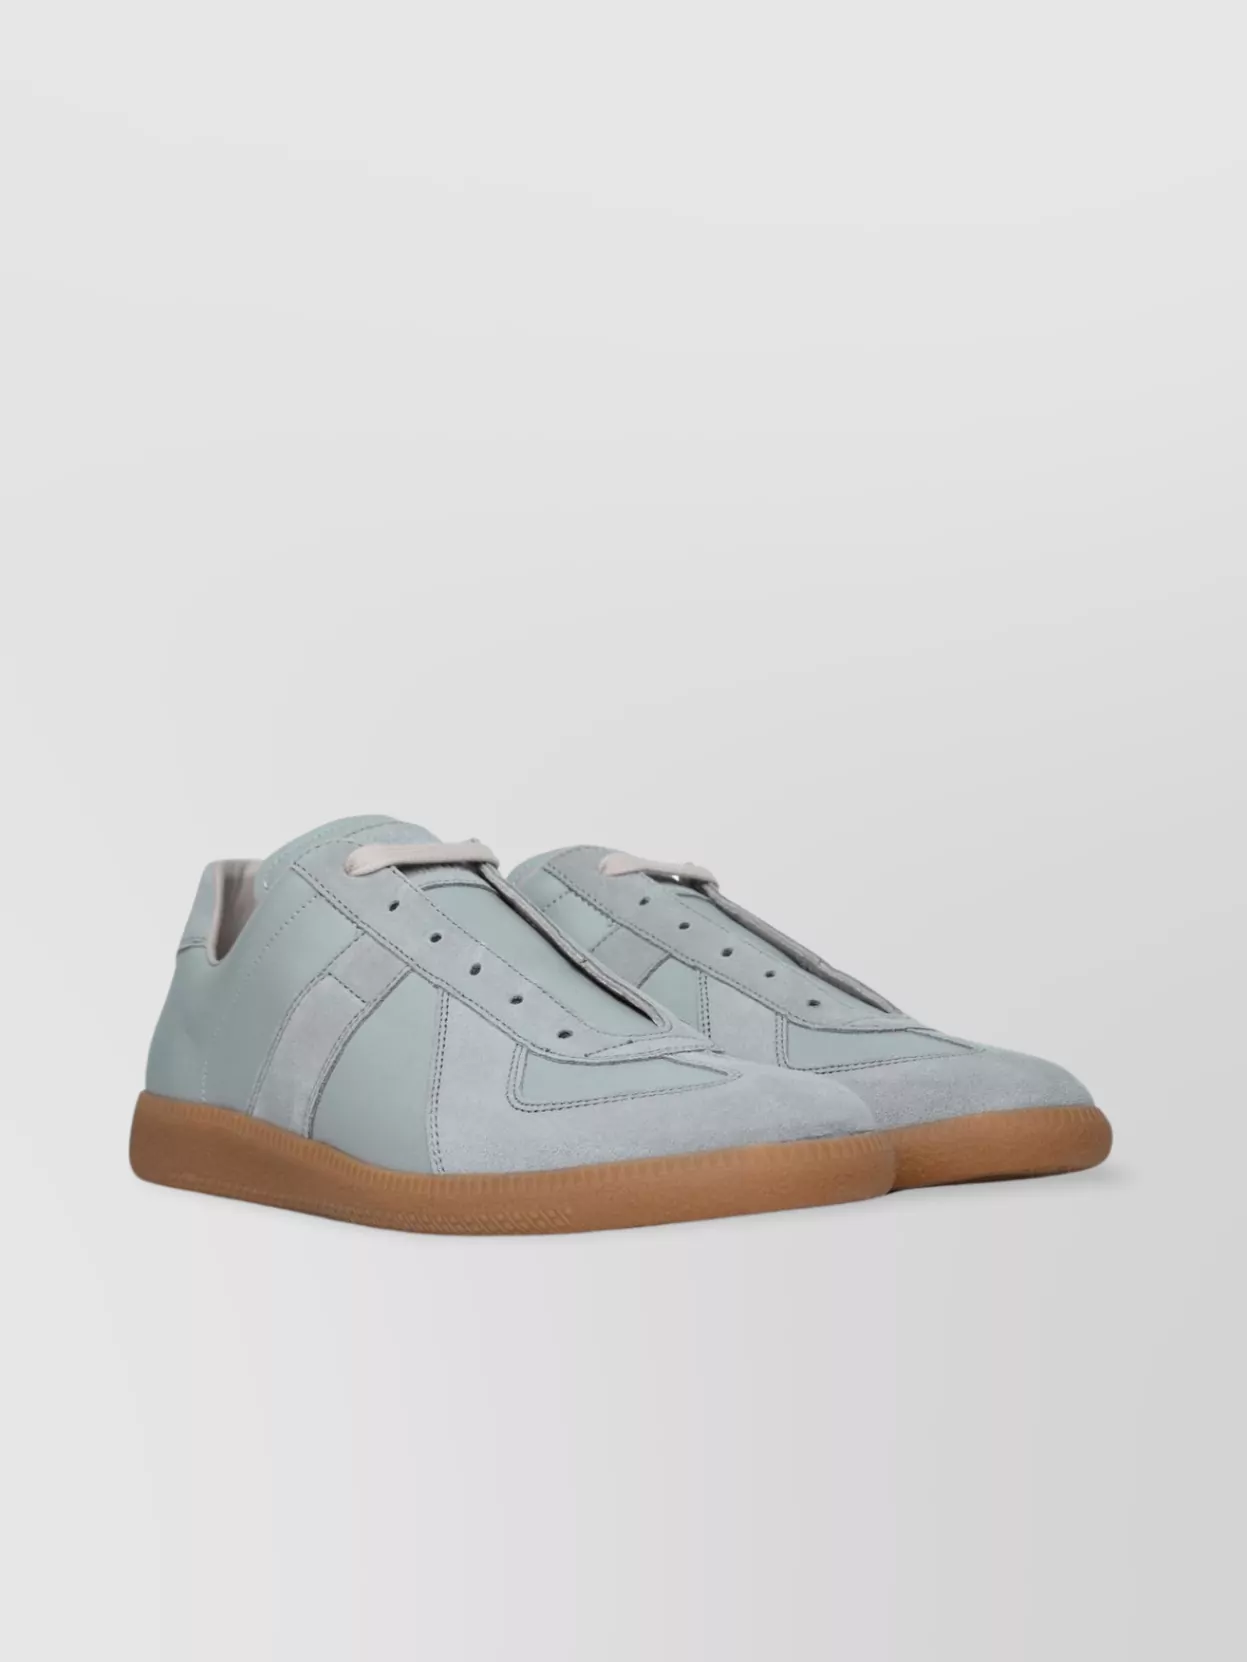 Maison Margiela 'replica' Leather Low-top Sneakers